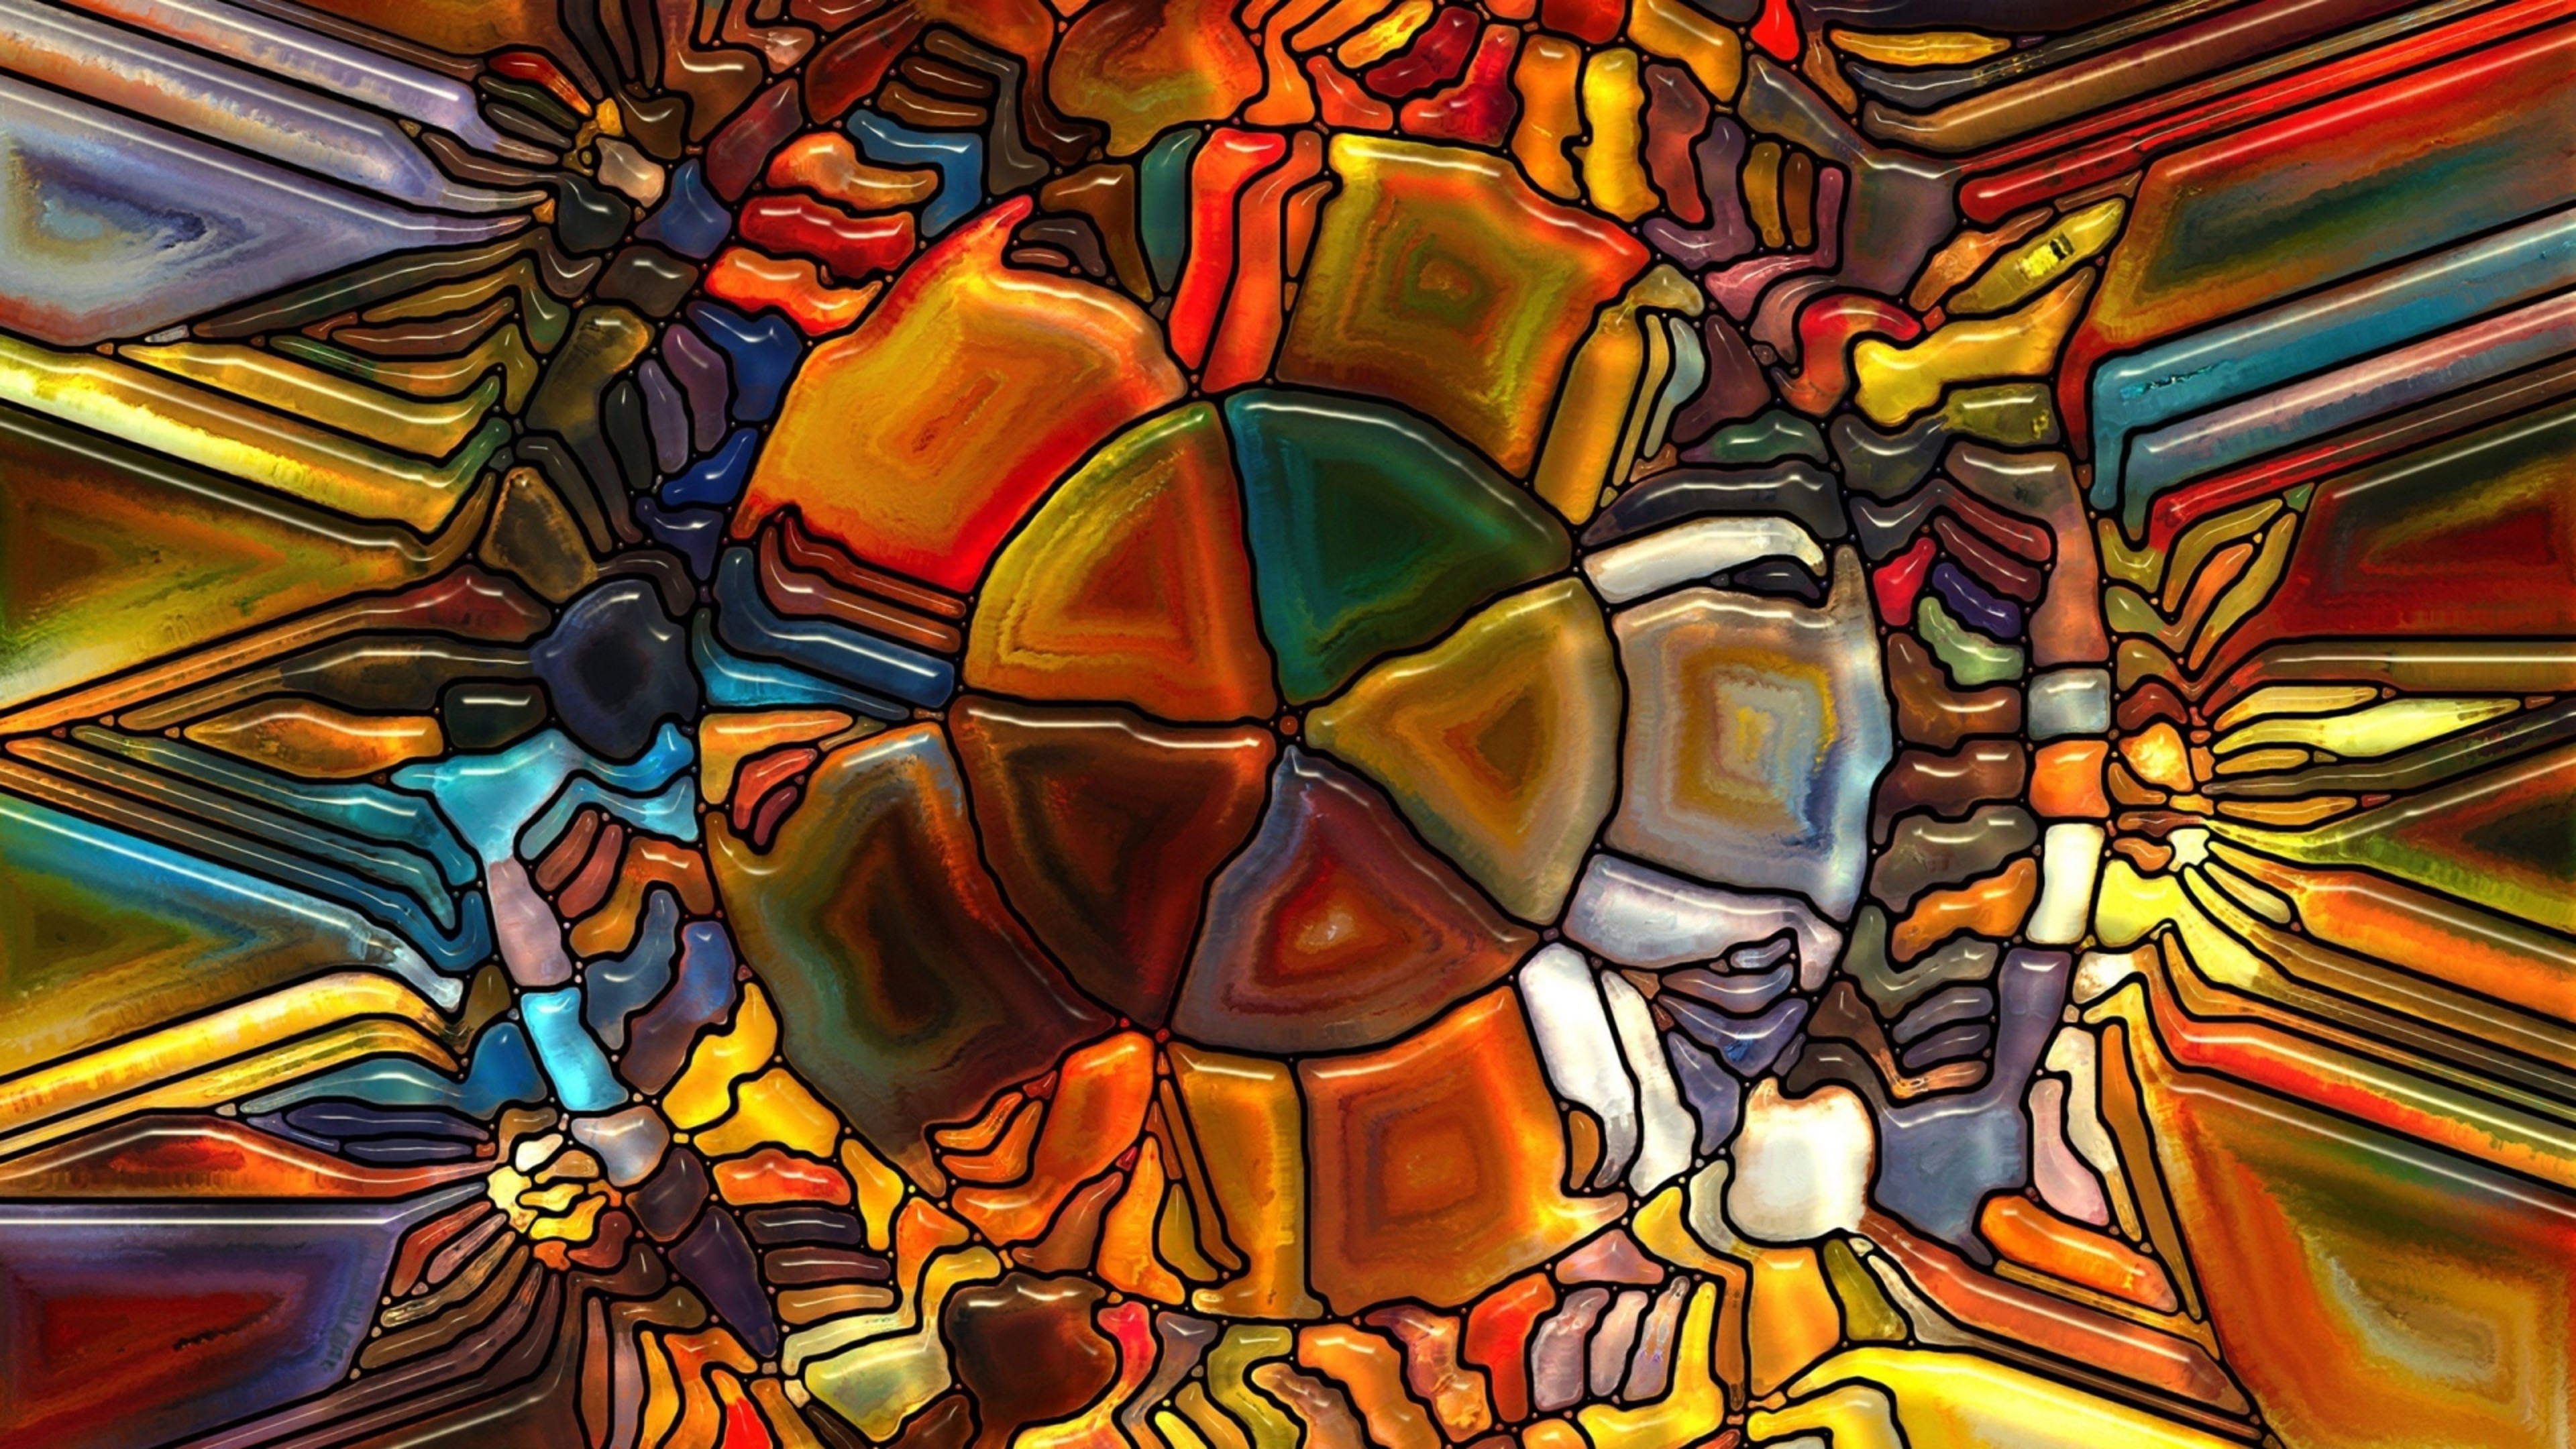 digital wallpaper for mobile,stained glass,psychedelic art,art,glass,visual arts